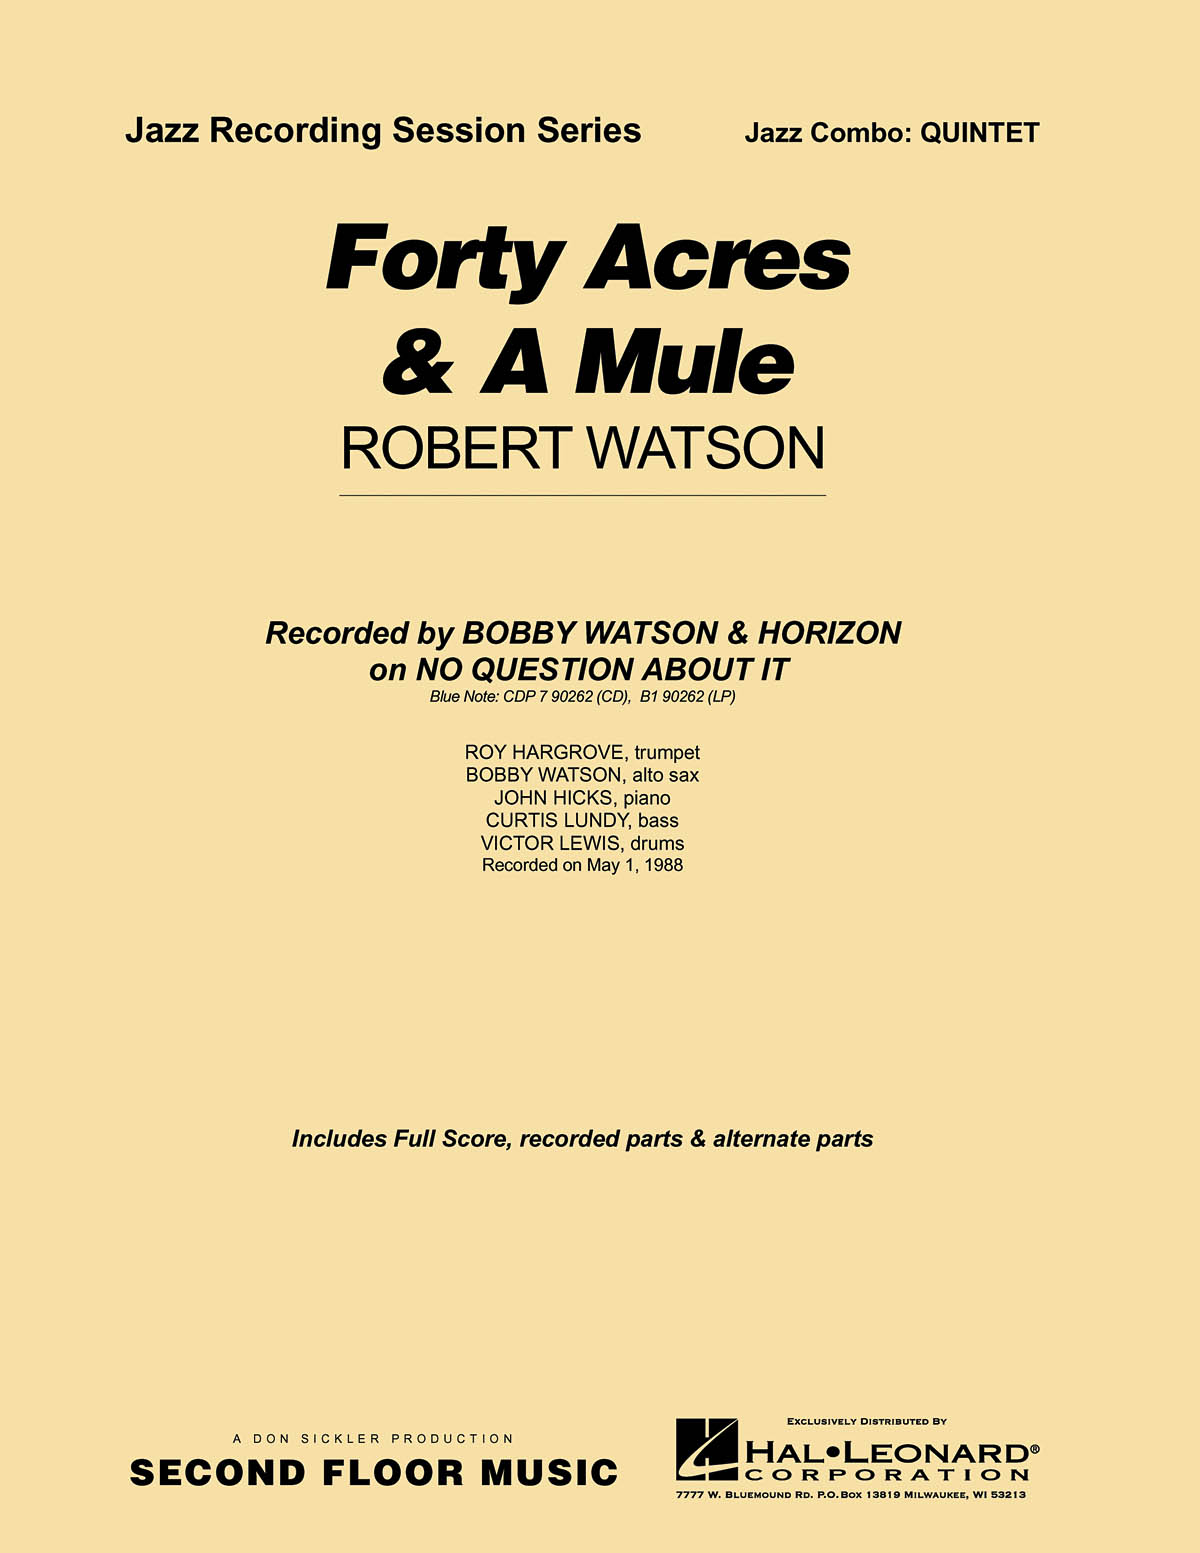 fuerty Acres and a Mule